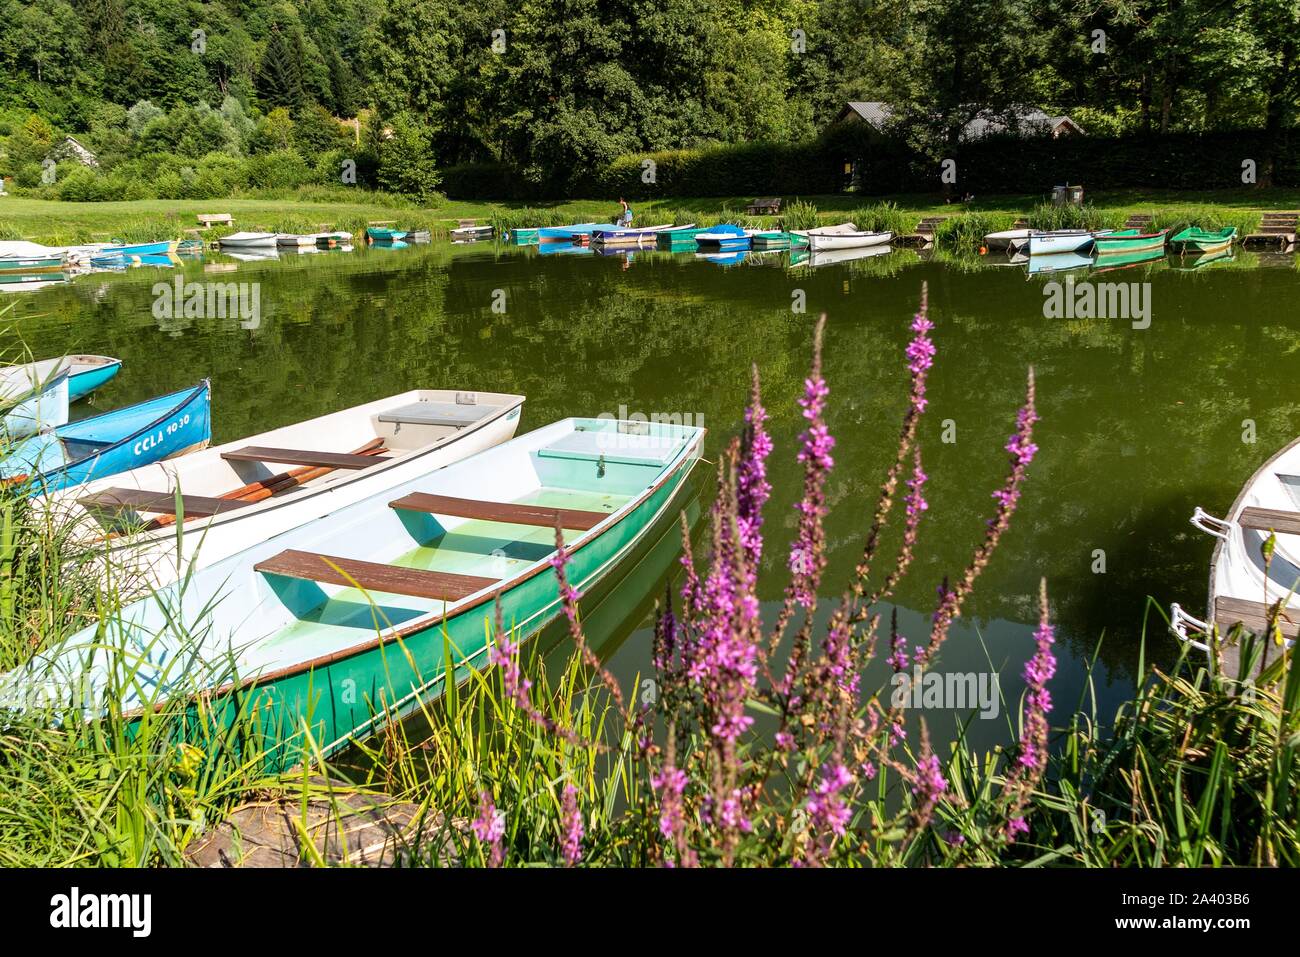 THE MARINA OF AIGUEBELETTE-LE-LAC, SAVOY (73), FRANCE Stock Photo